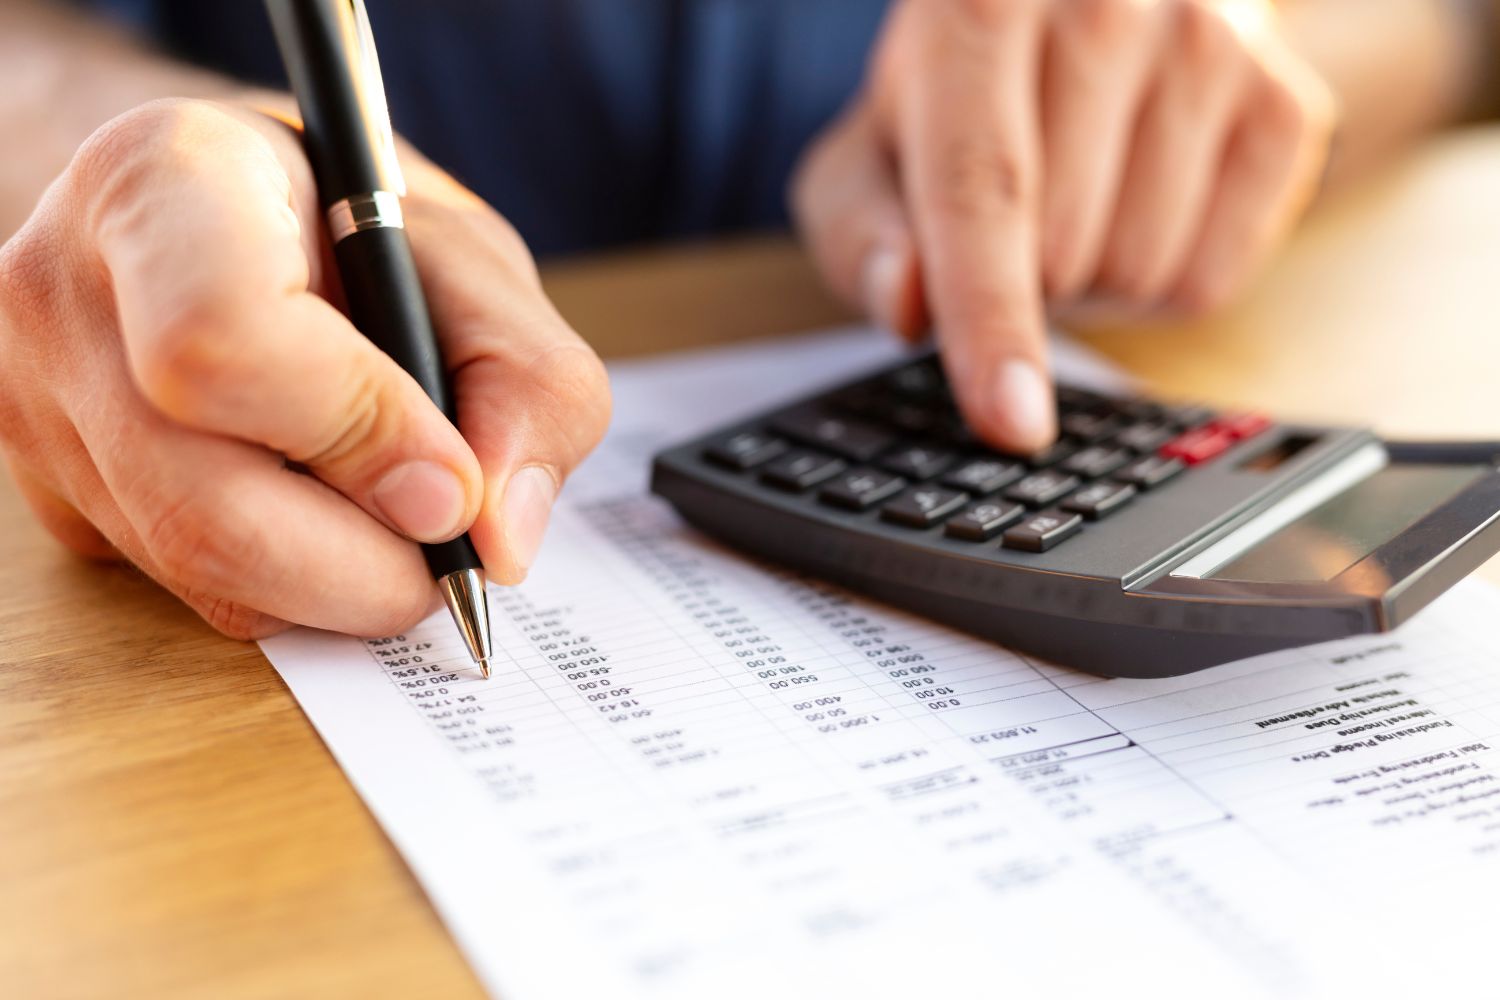 accounting for real estate agents